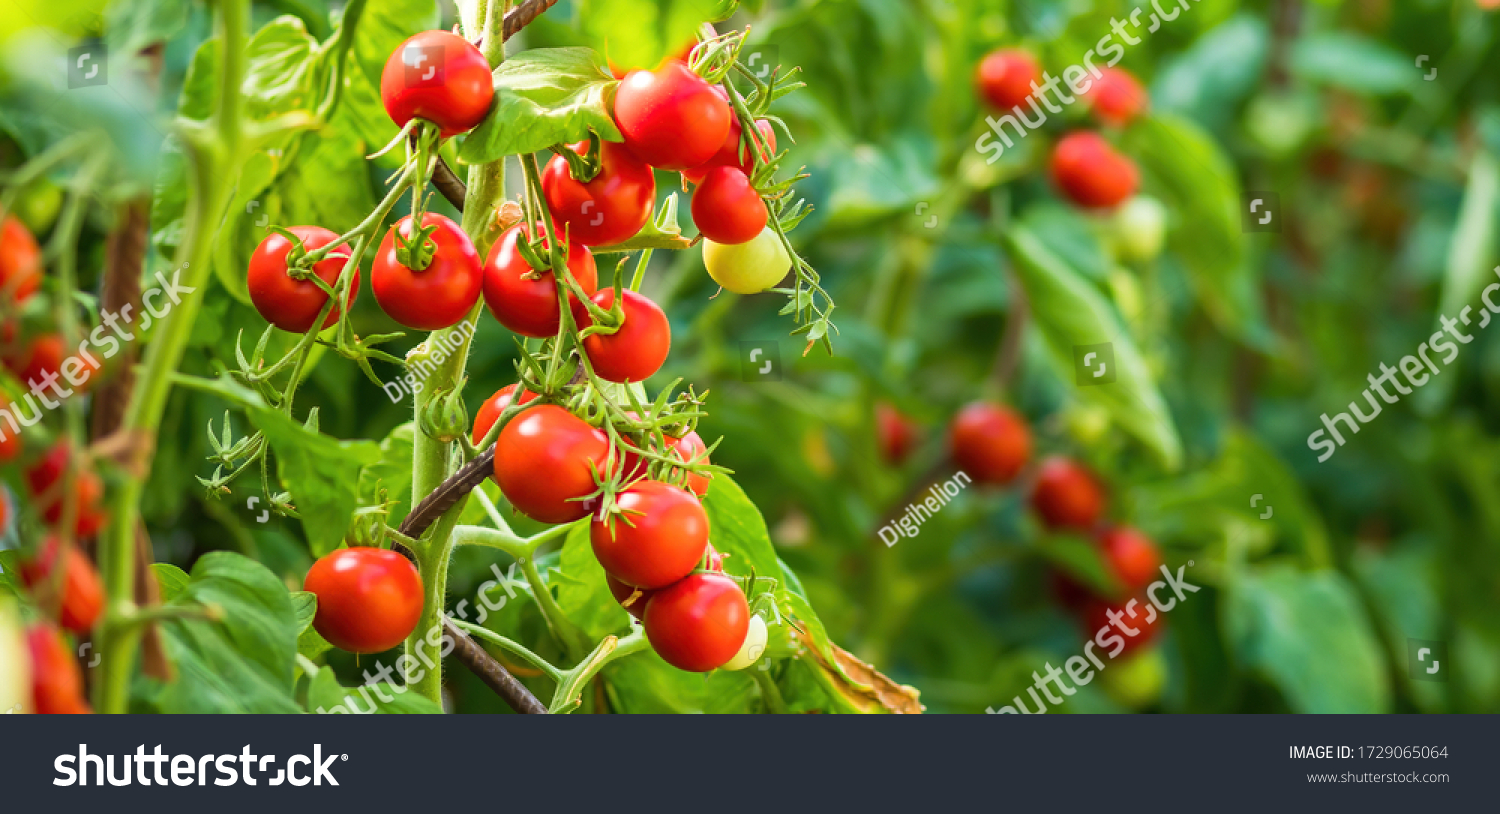 Ripe tomato plant growing in greenhouse. Fresh bunch of red natural tomatoes on a branch in organic vegetable garden. Blurry background and copy space for your advertising text message. #1729065064